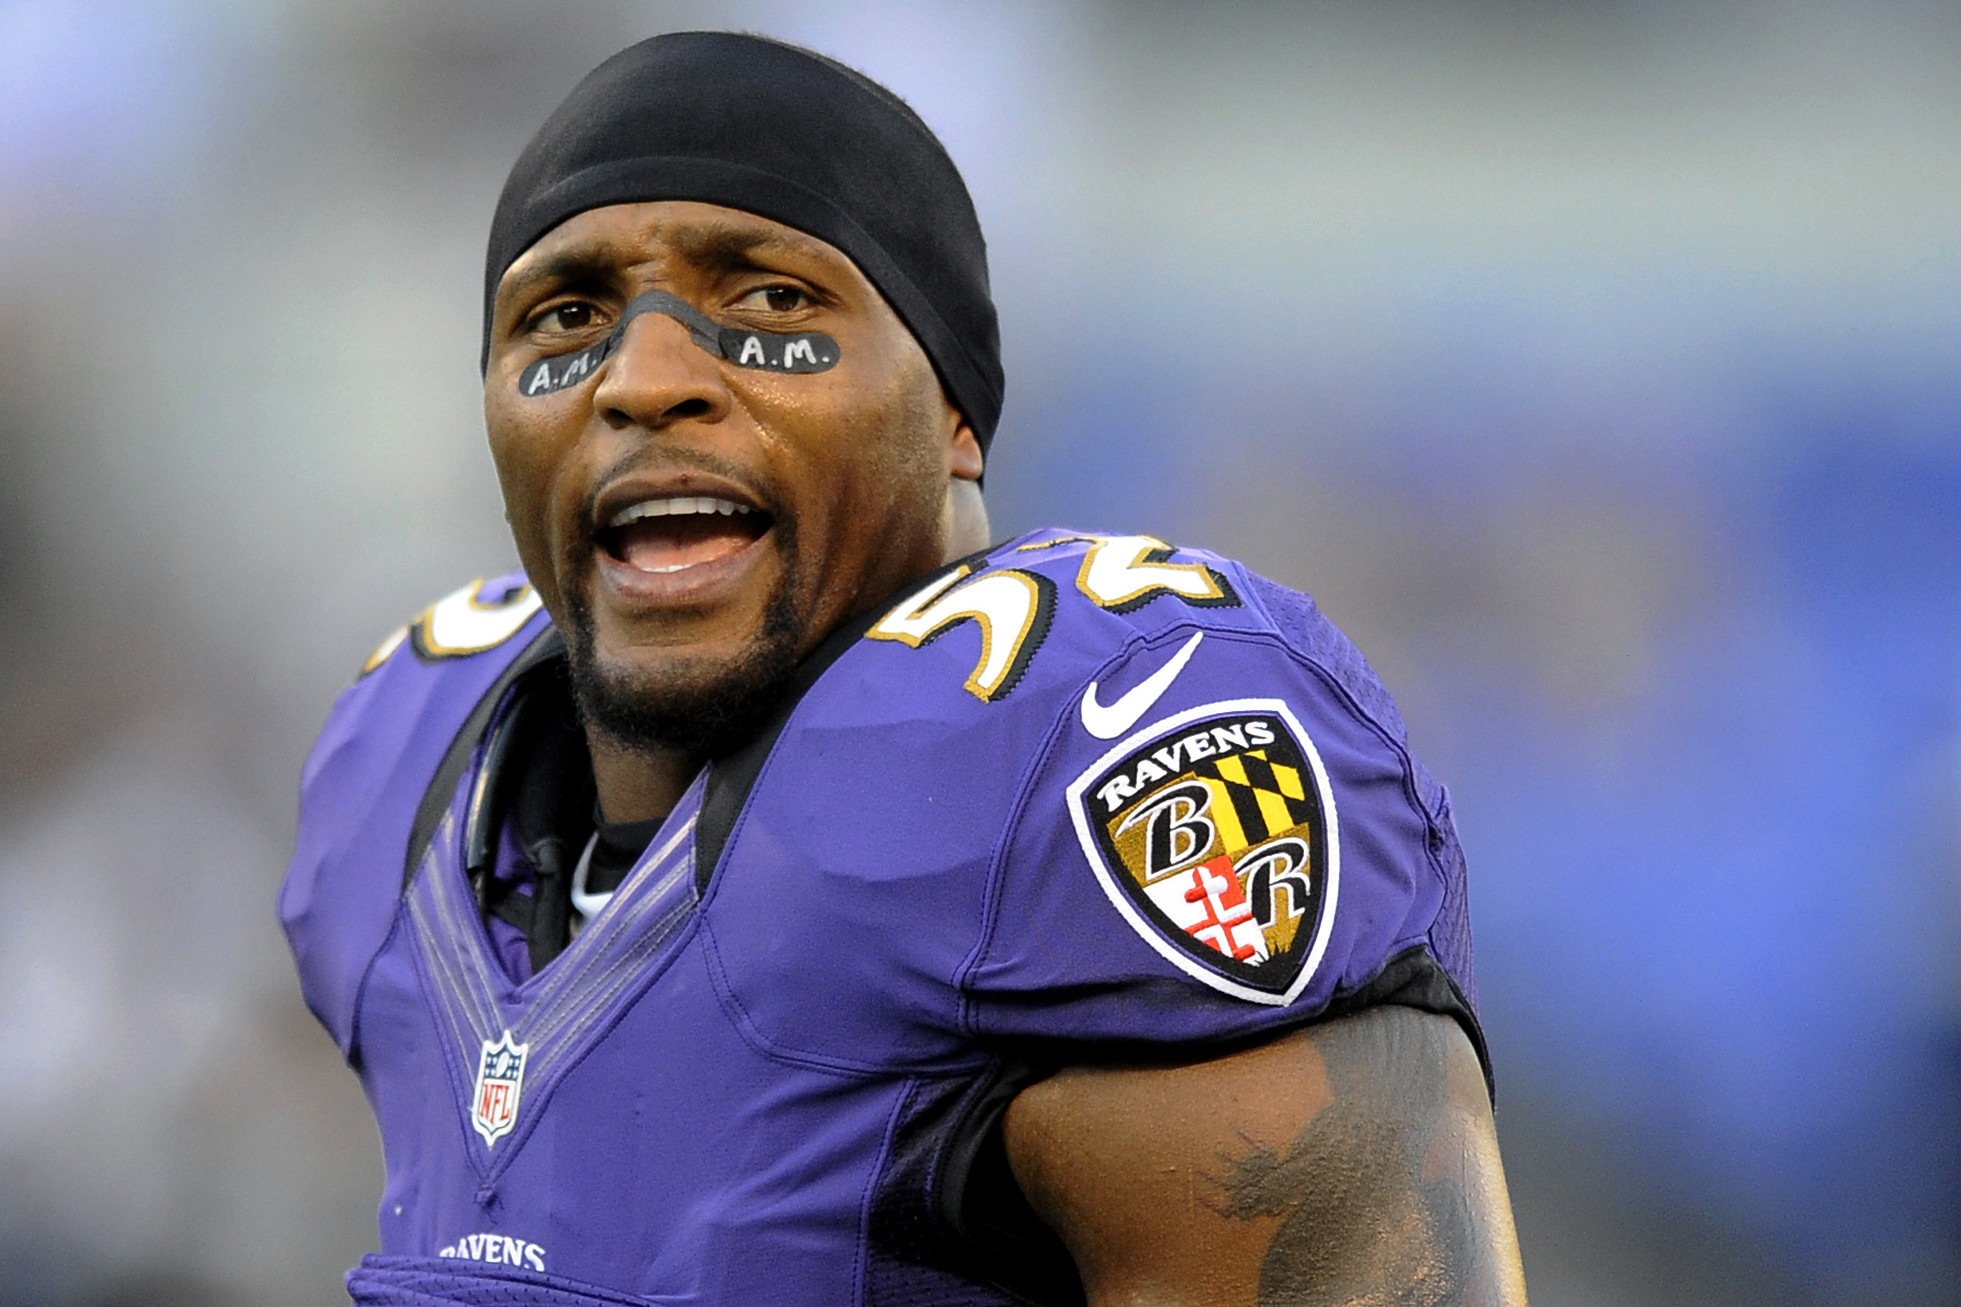 Ray Lewis: 6 children, with an unknown amount of women.